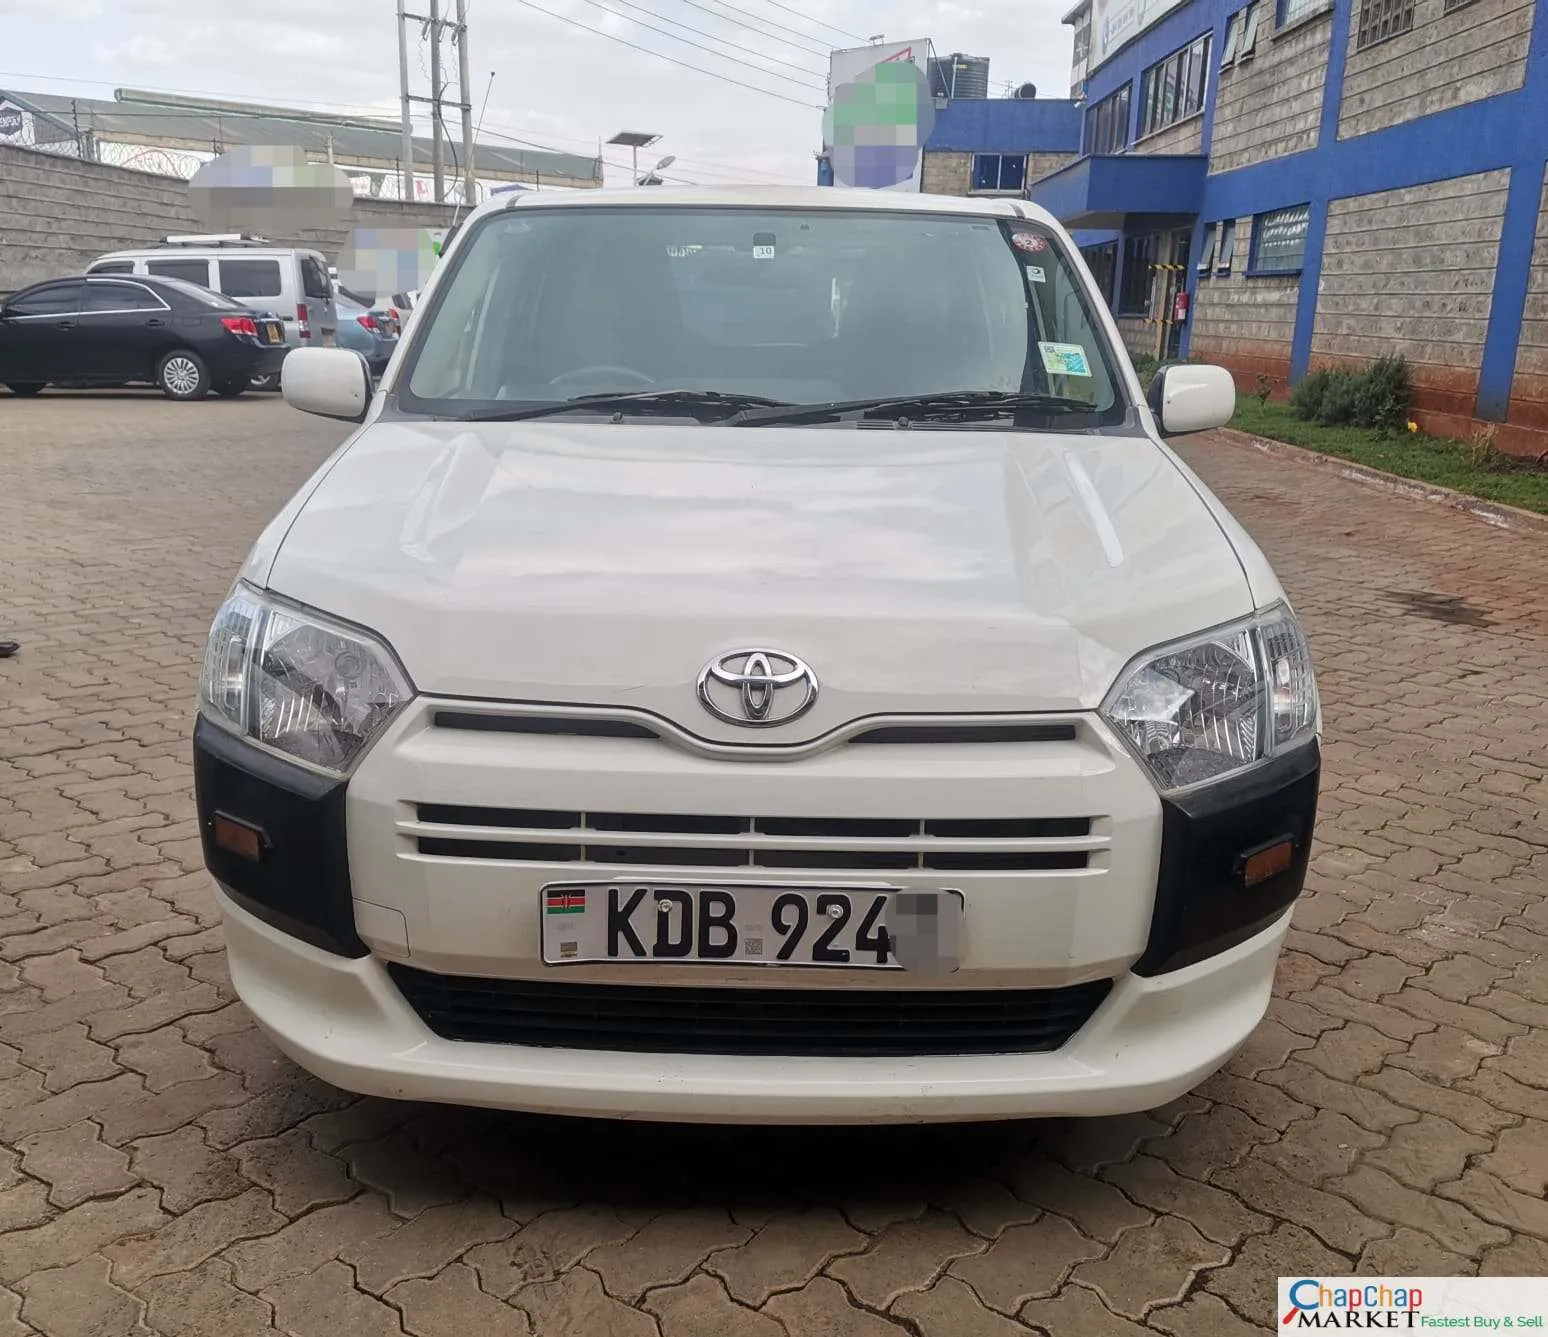 Cars Cars For Sale/Vehicles-Toyota PROBOX for sale in Kenya NEW SHAPE You Pay 30% Deposit Trade in OK EXCLUSIVE 7